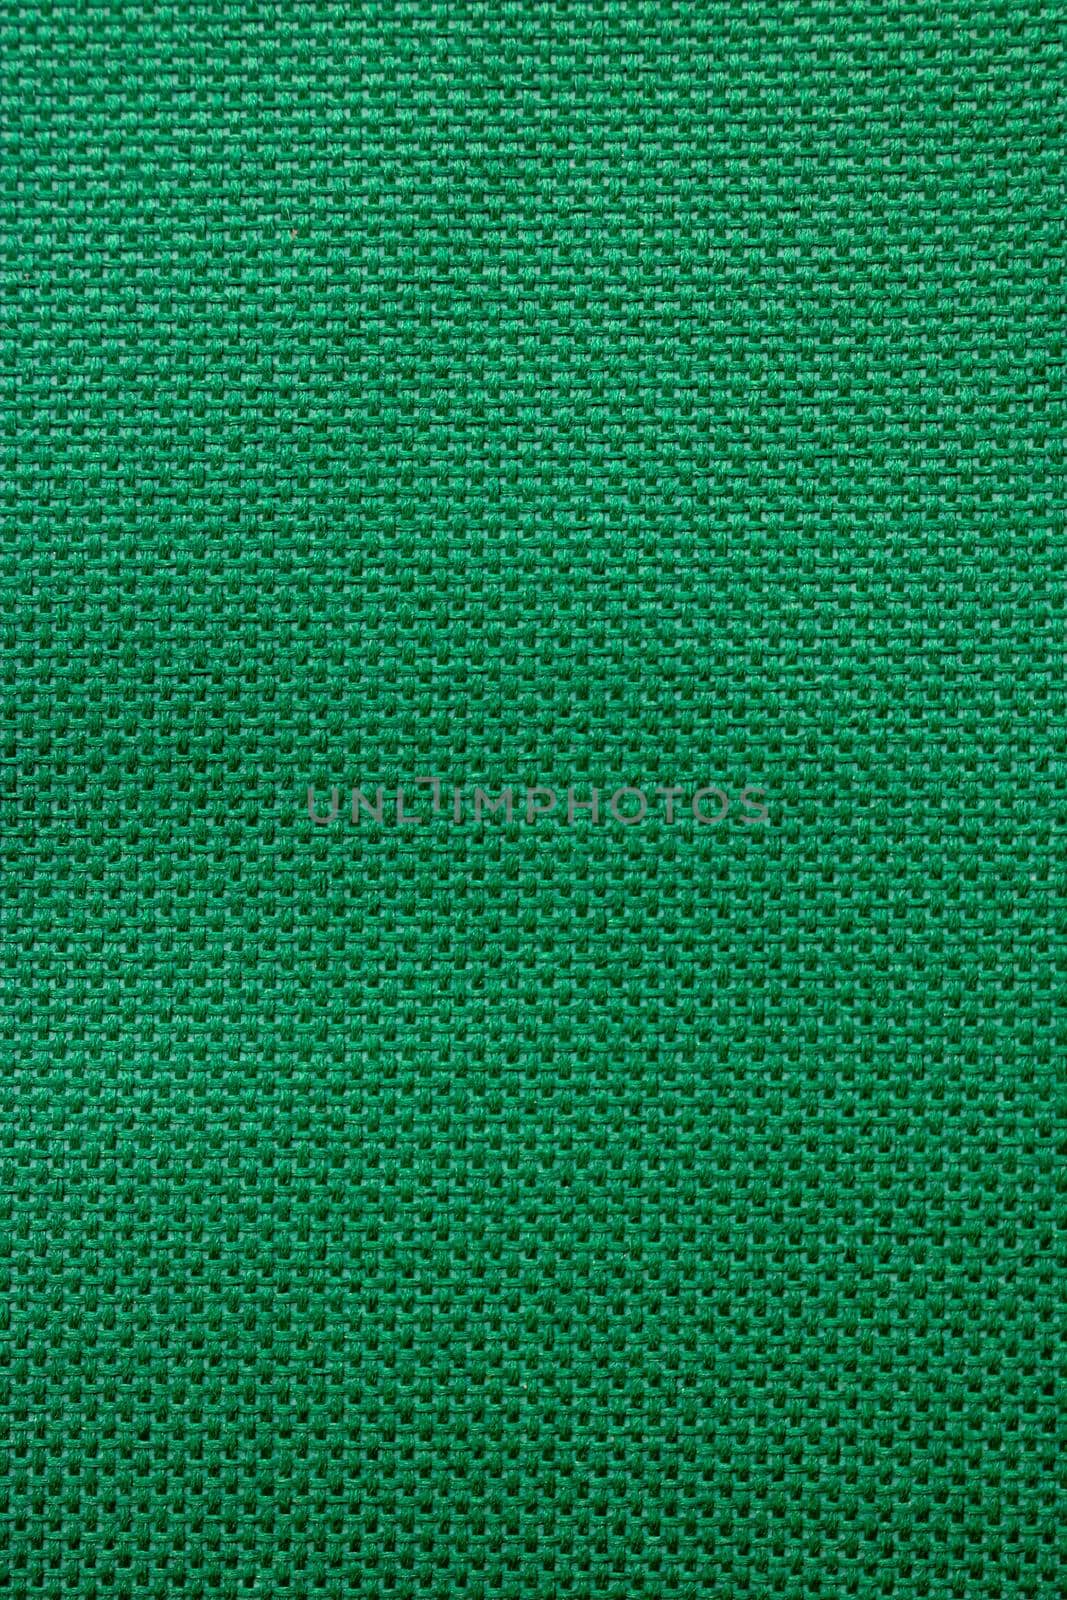 Dark green rough textile material. background texture close-up.